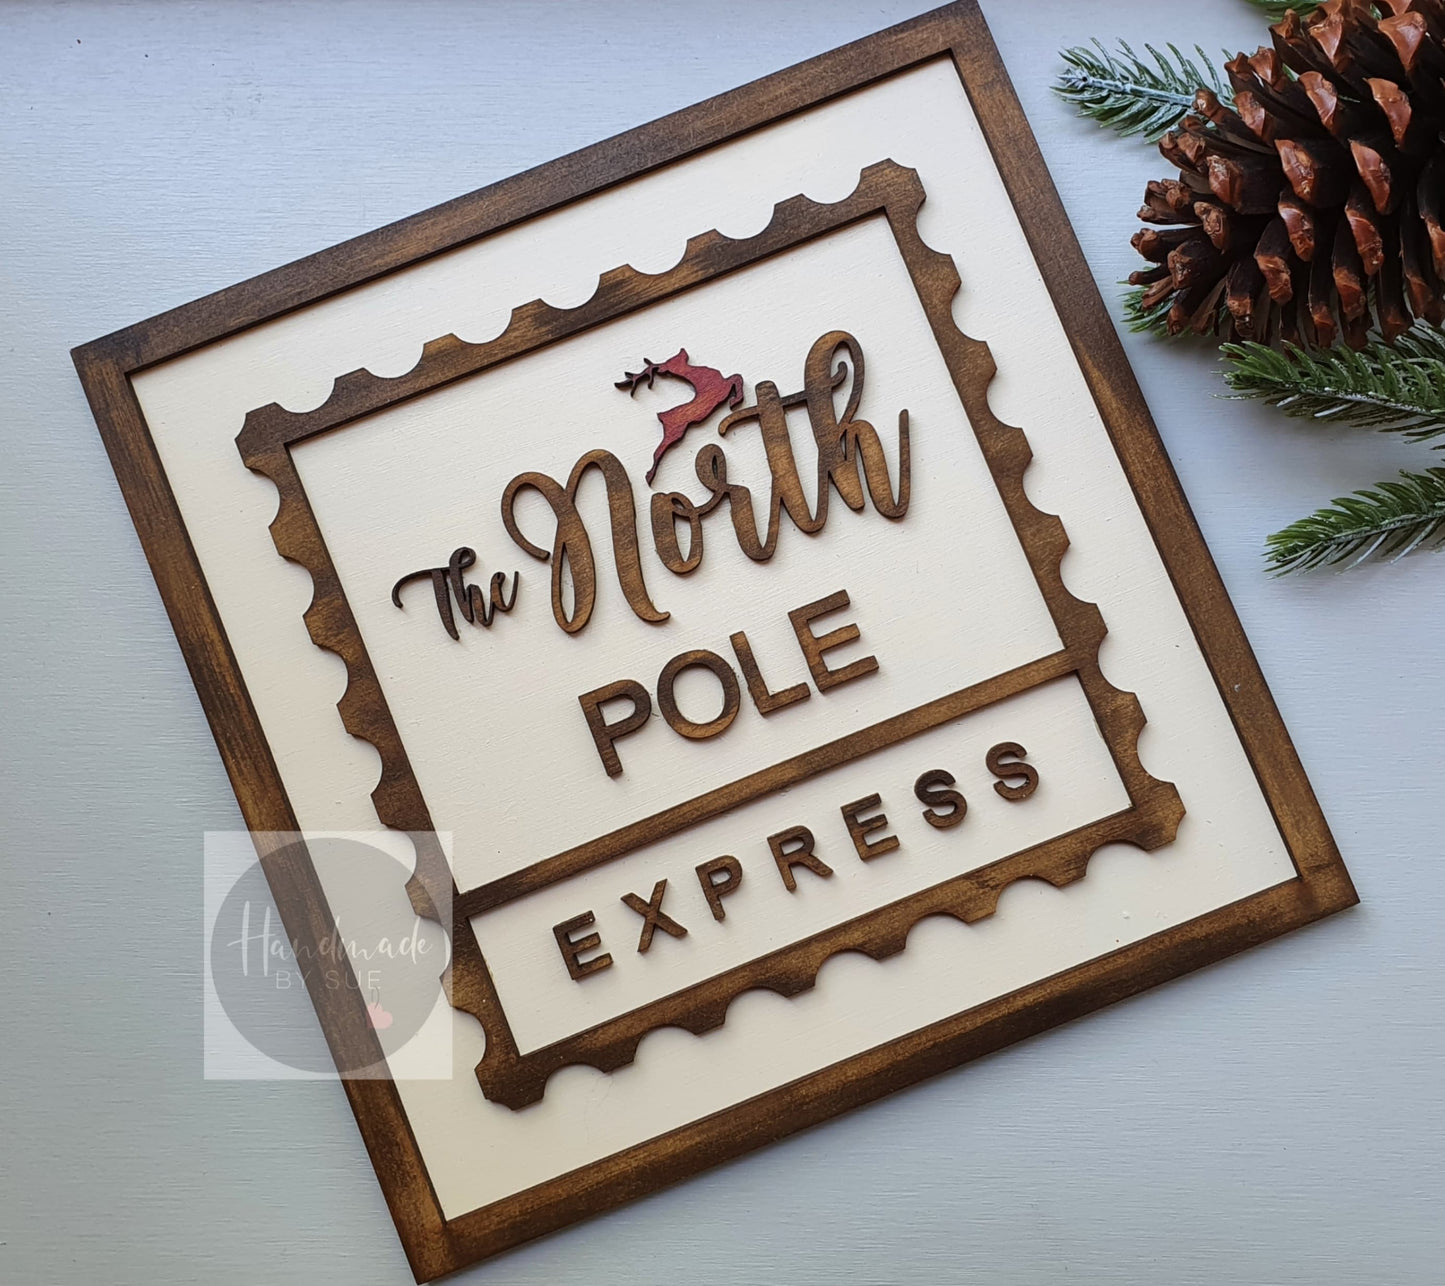 The North Pole Express Decorative Sign